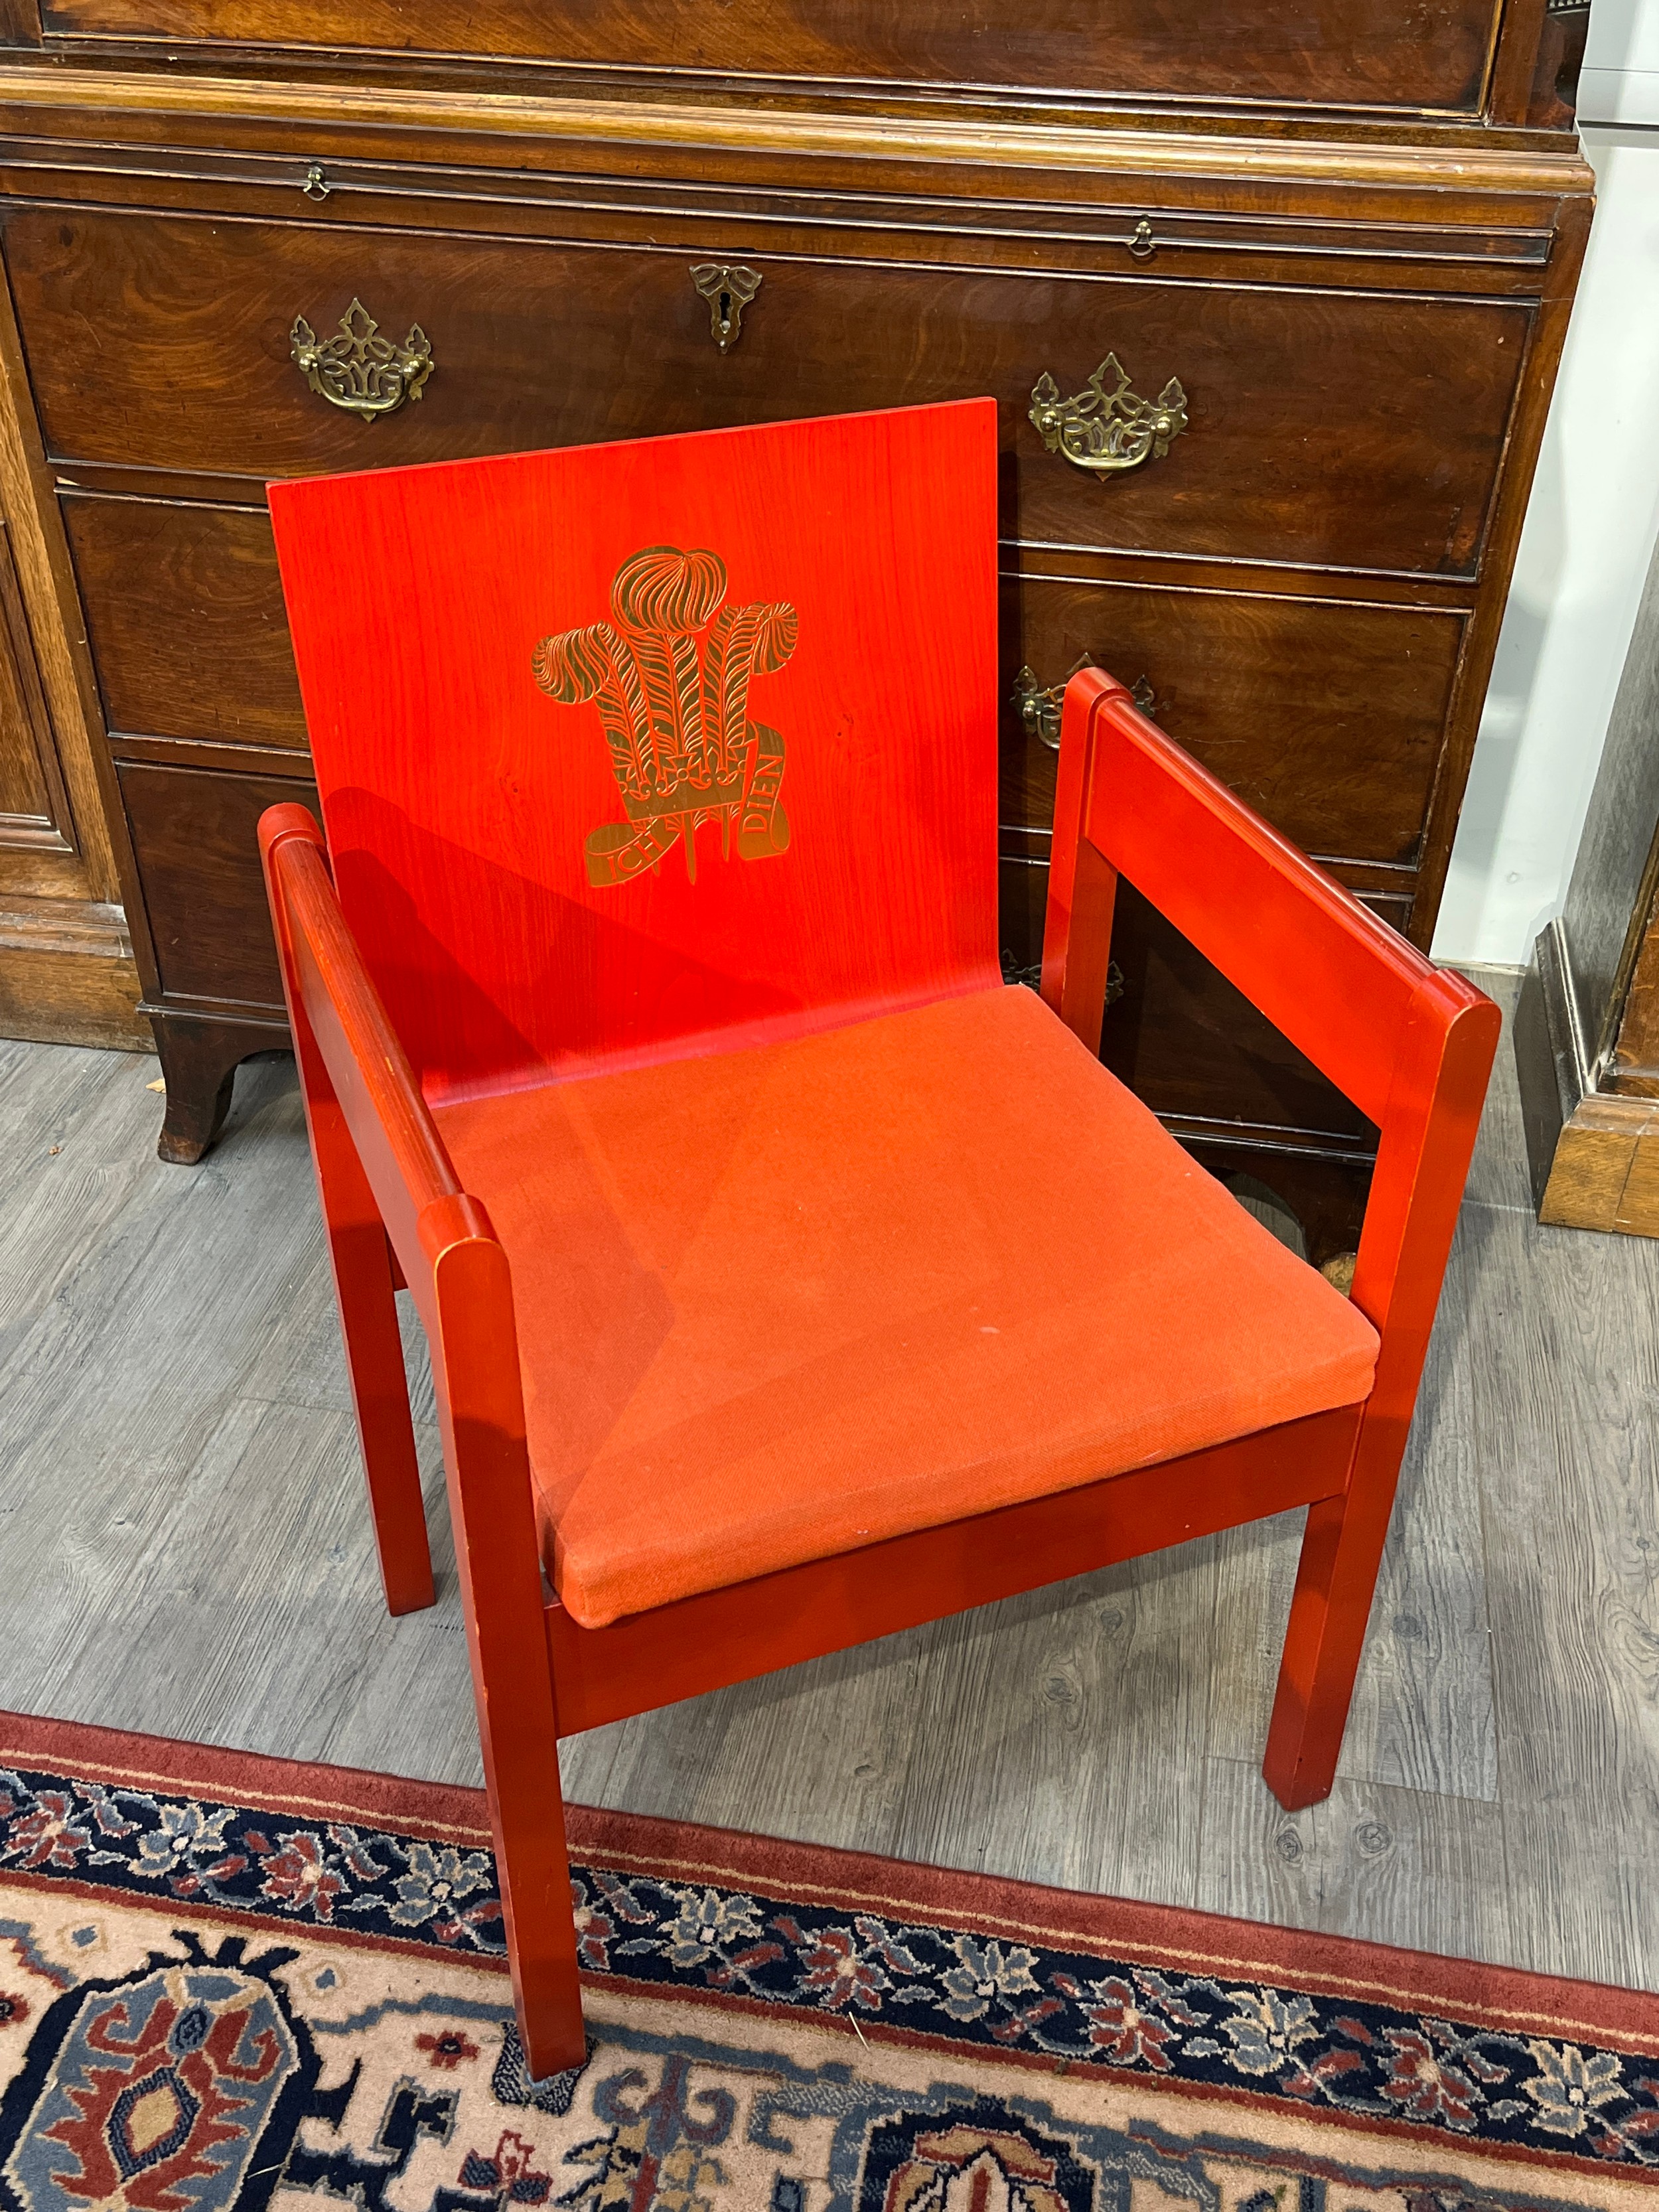 A Prince of Wales Investiture chair frame, as designed by Lord Snowdon, red stained plywood bentwood